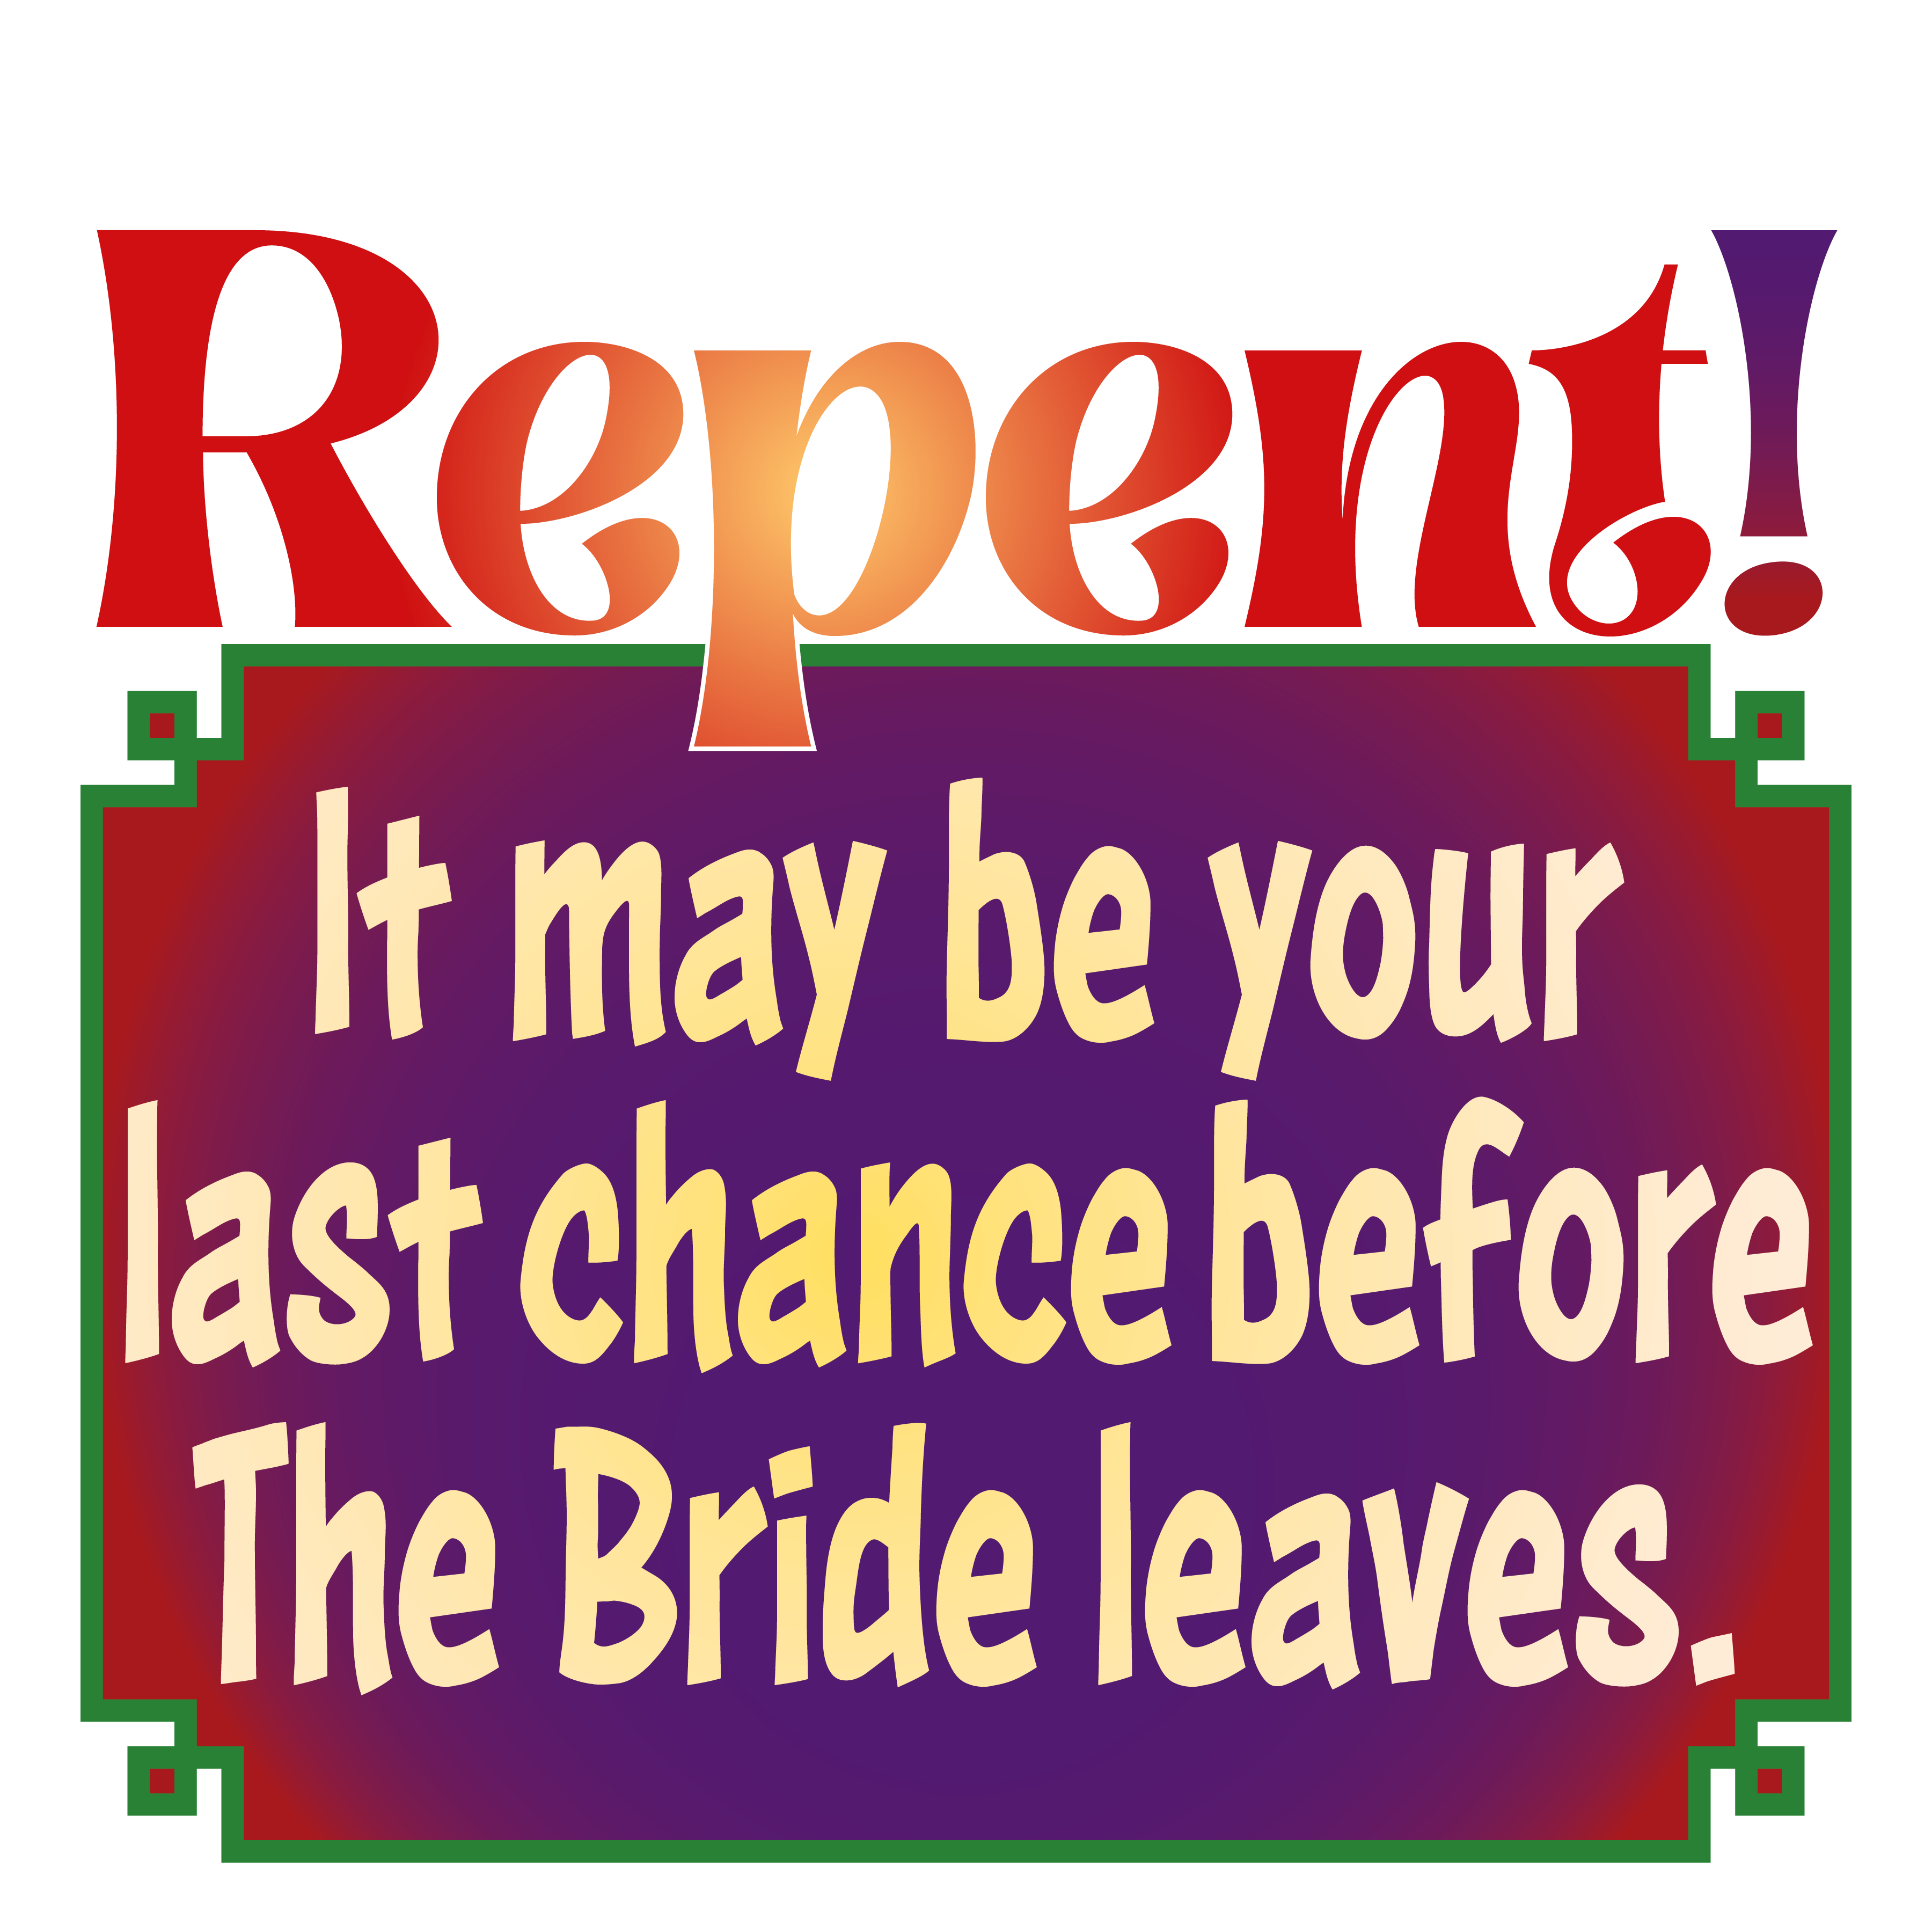 Repent, it may be your last chance before the Bride leaves.